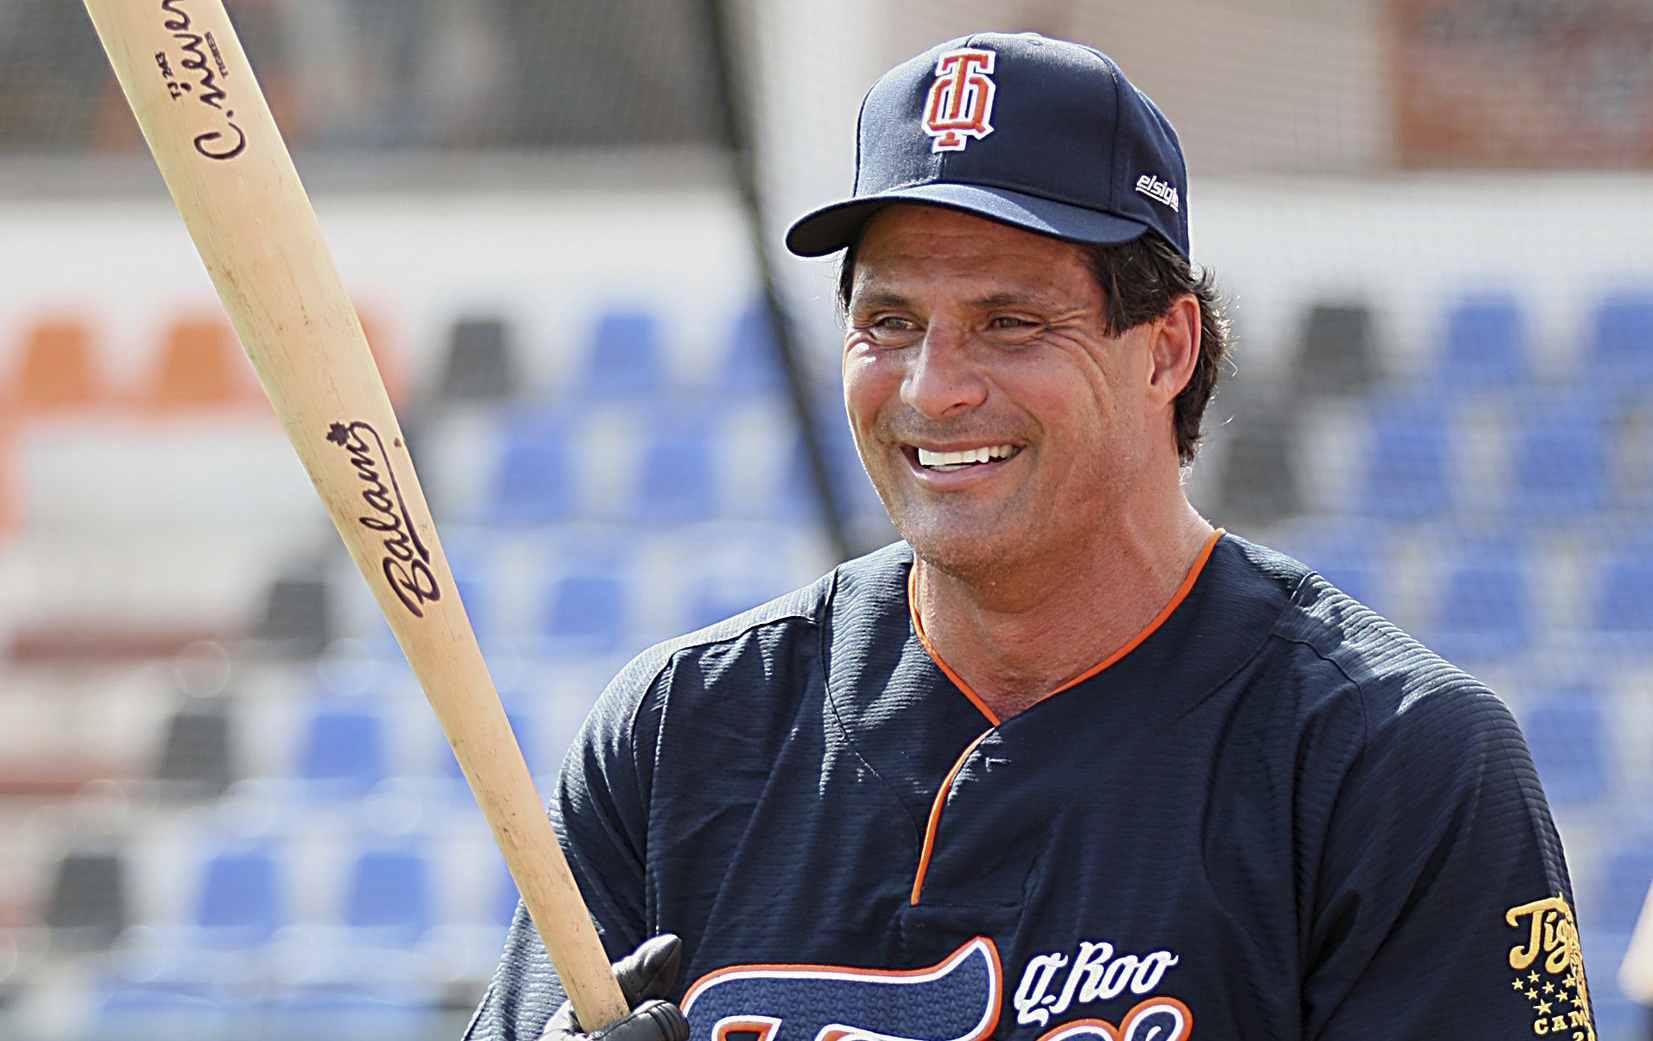 Jose Canseco can help Tim Tebow hit 40 major league homers, says